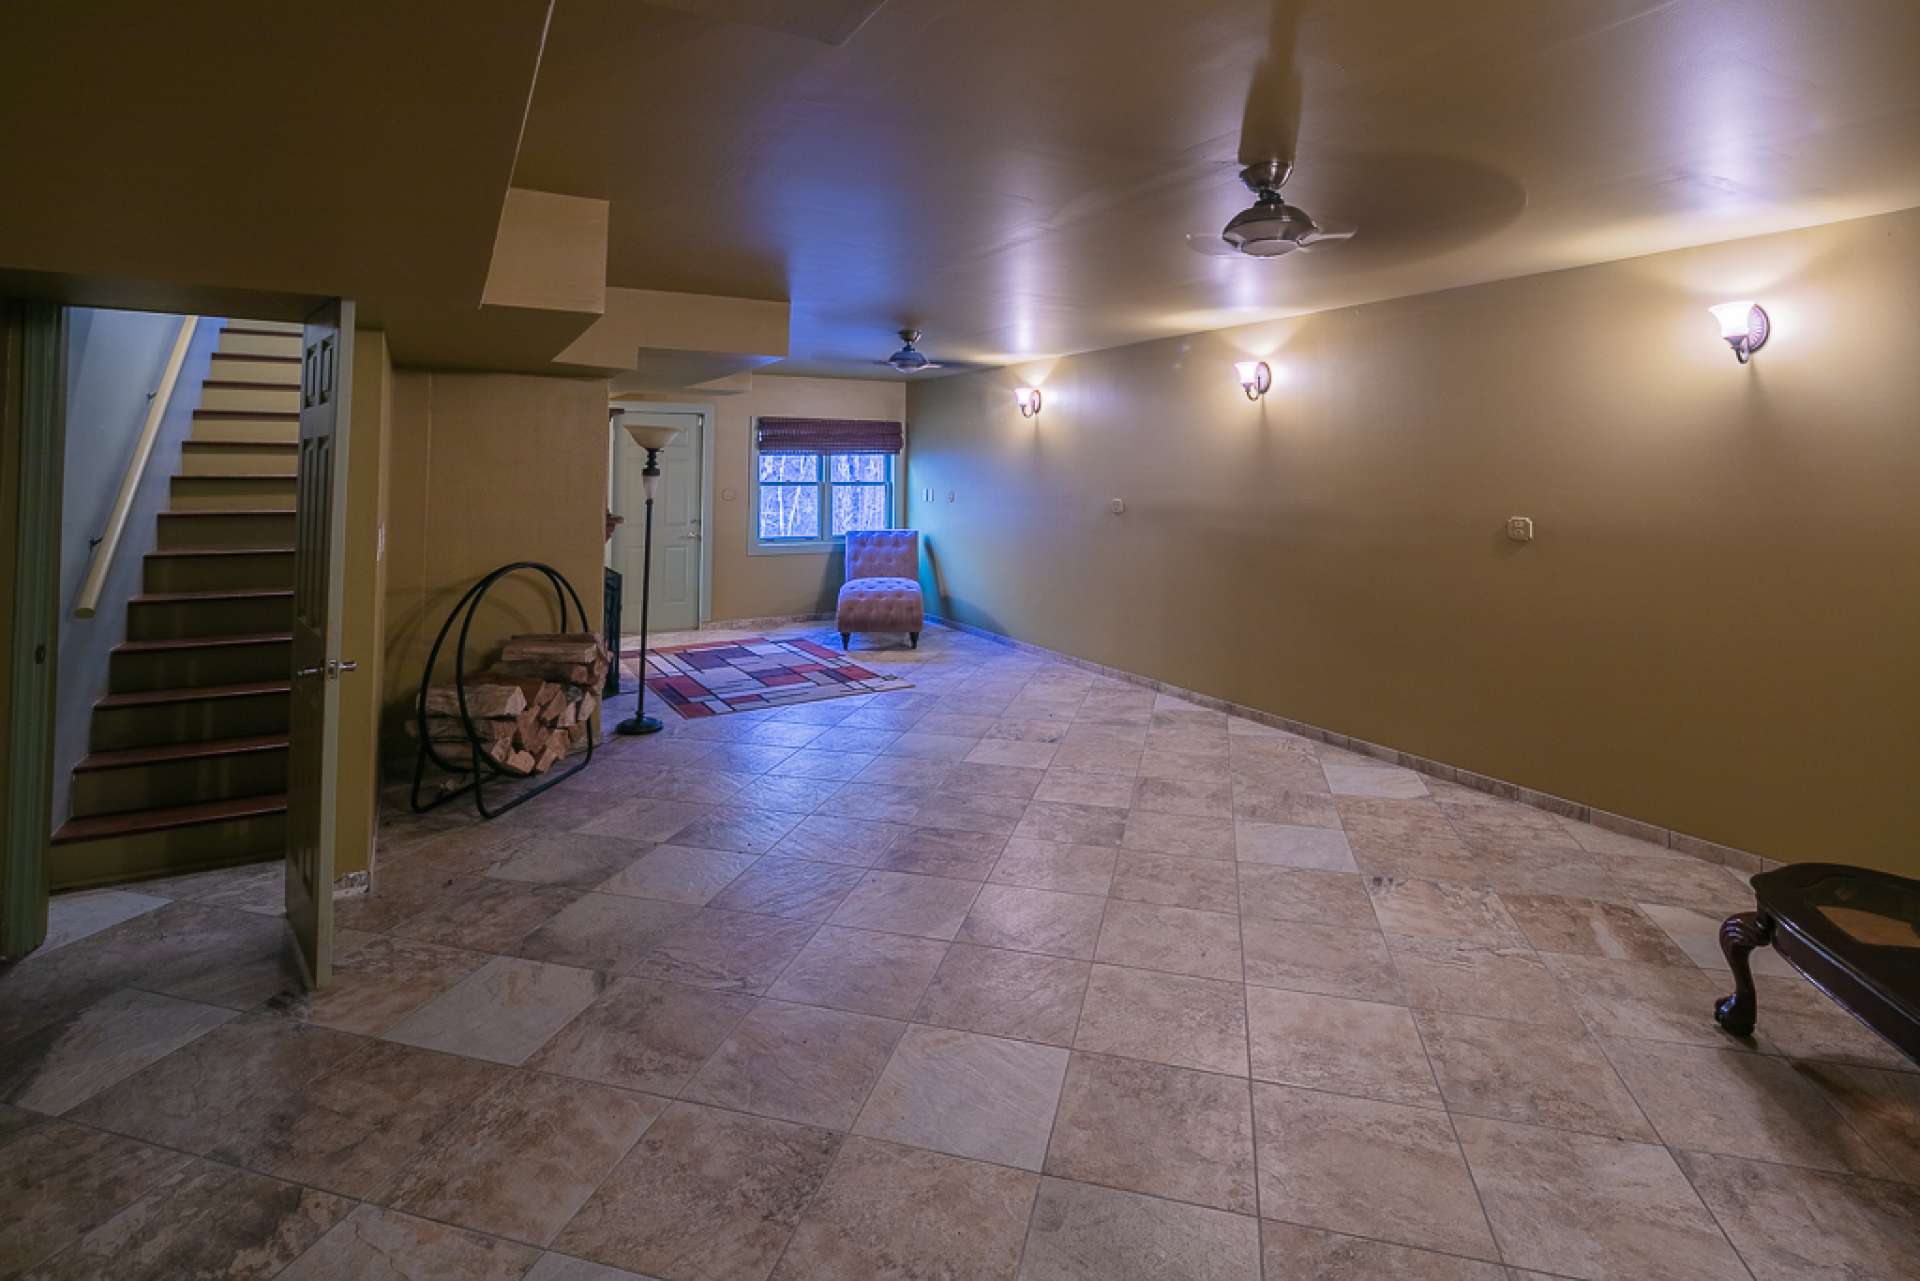 The lower level features a large open space, ideal for a game room, with fireplace and sitting area.